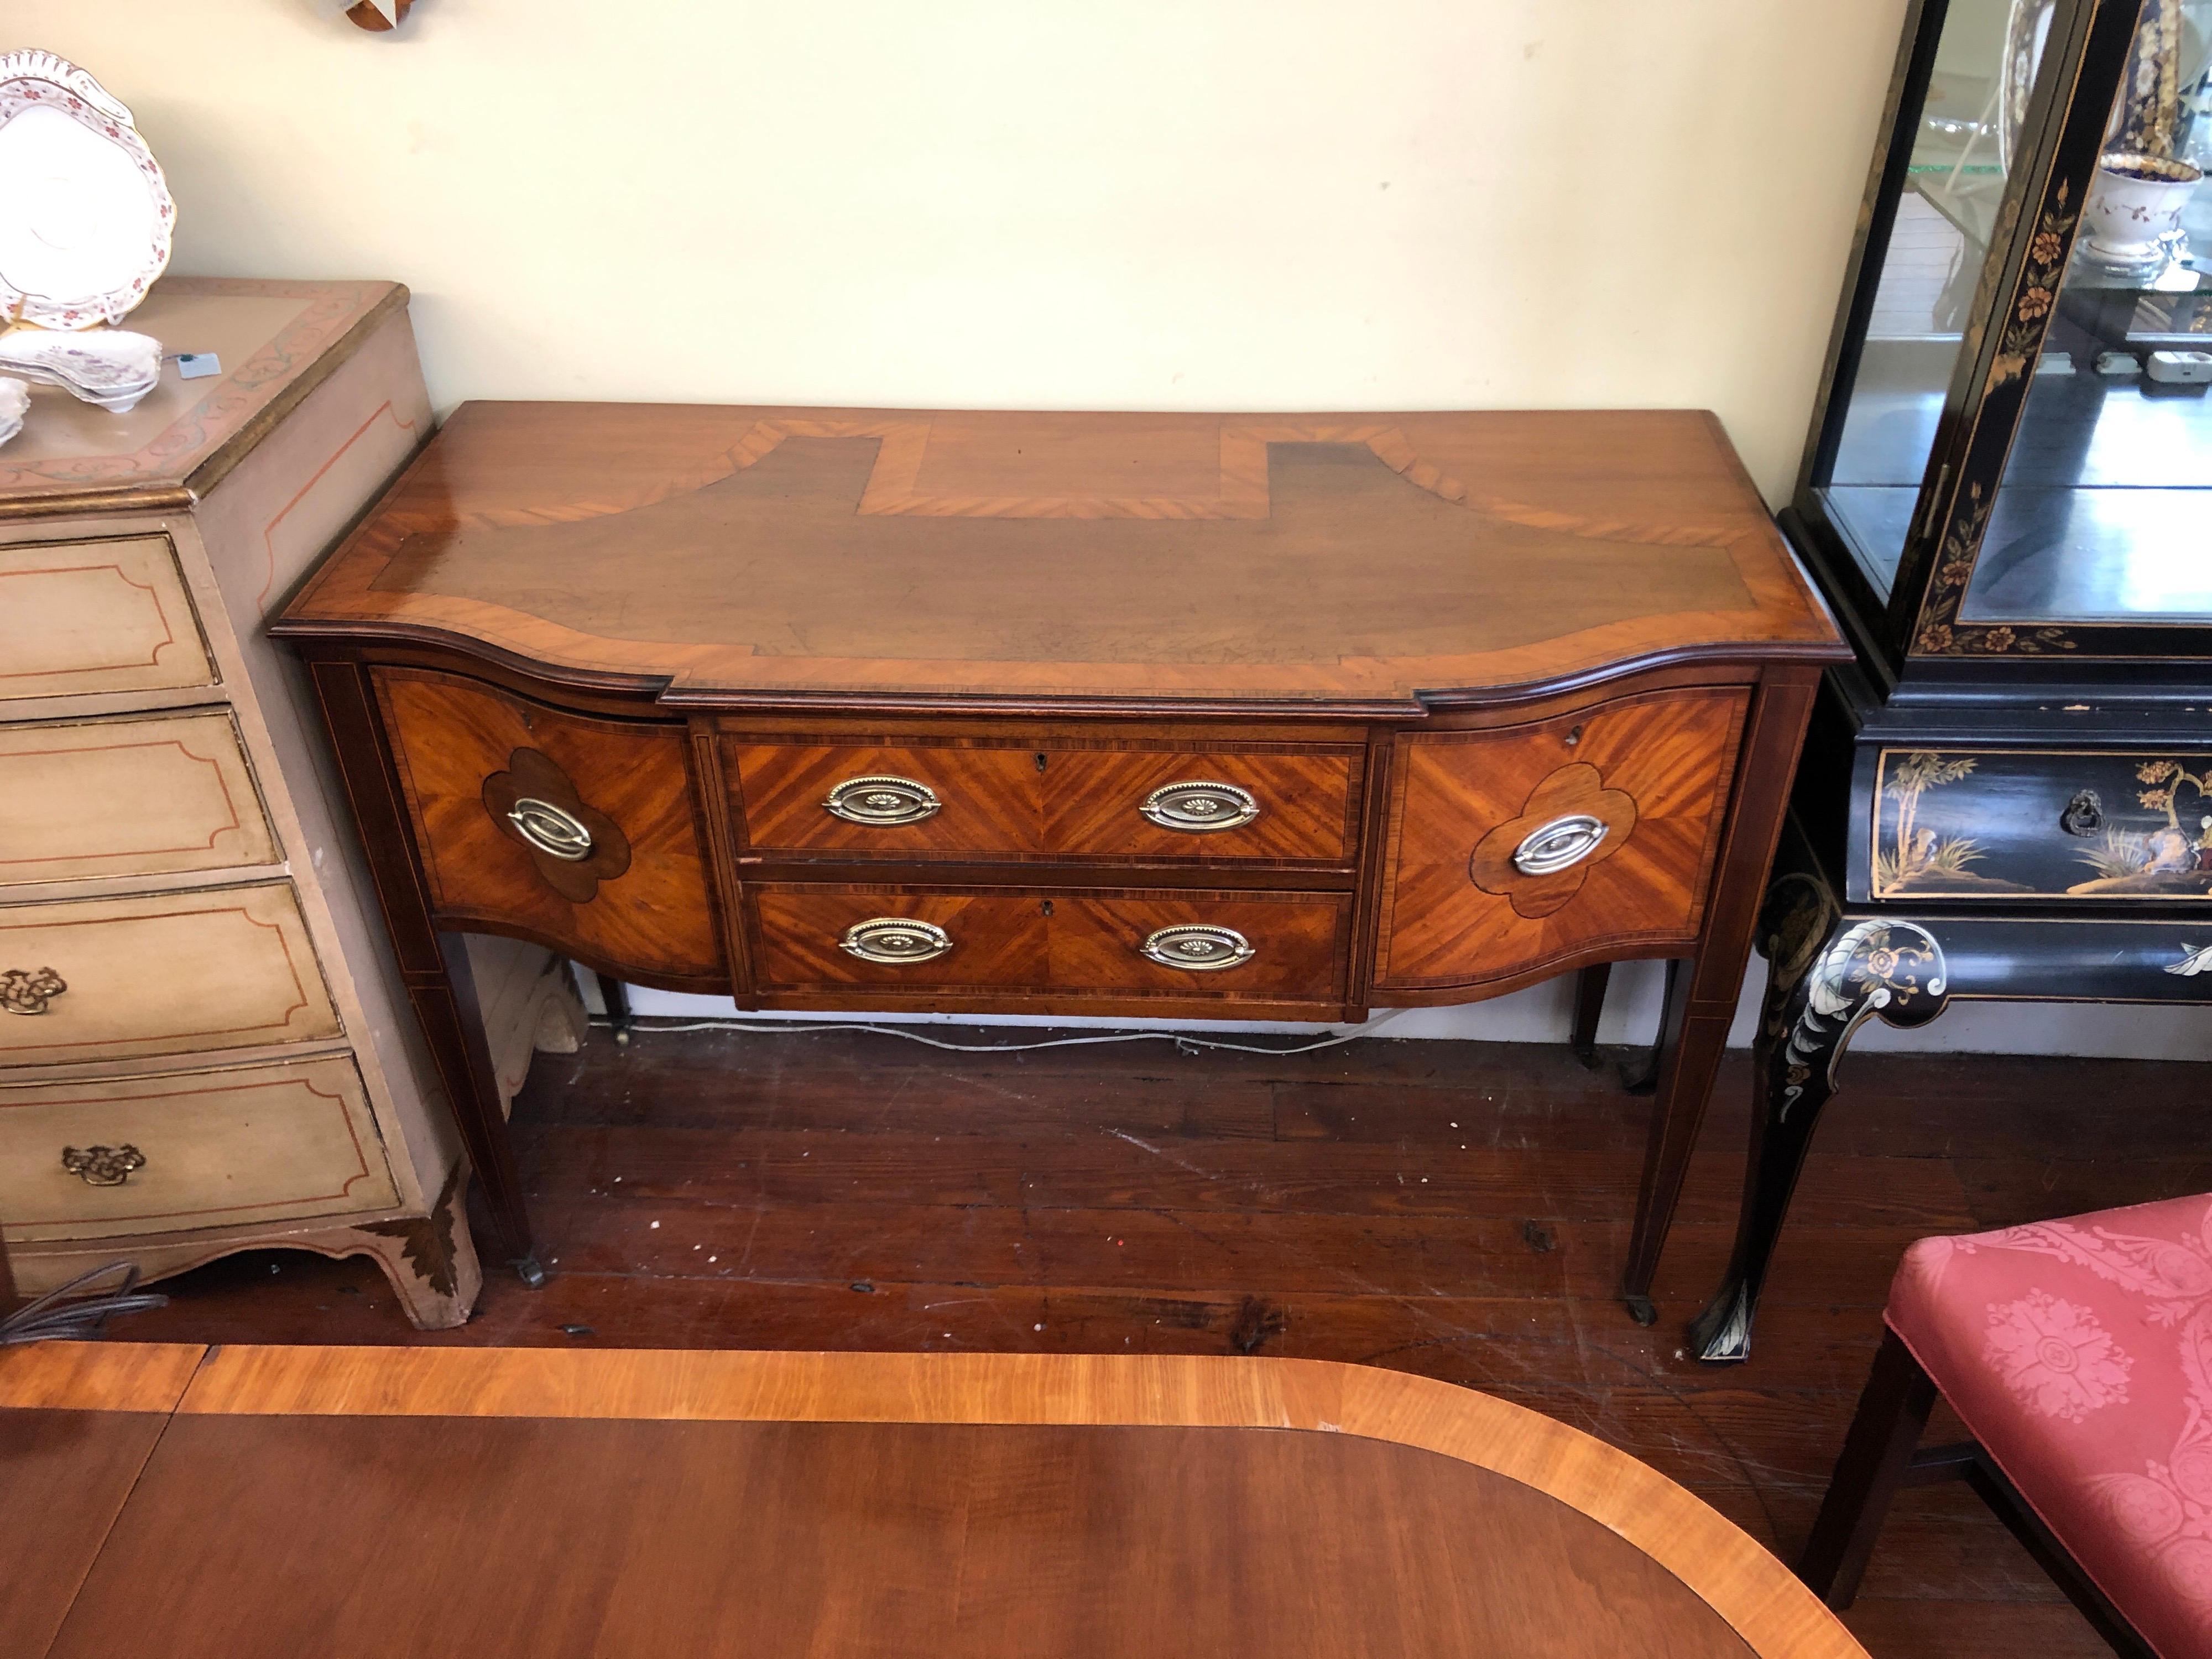 Extraordinarily fine mid 19th century Antique English Hepplewhite style Server or small Sideboard having its original oval brasses and original brass casters. It has a most unusual marquetry inlaid top with the primary wood overall being satinwood,